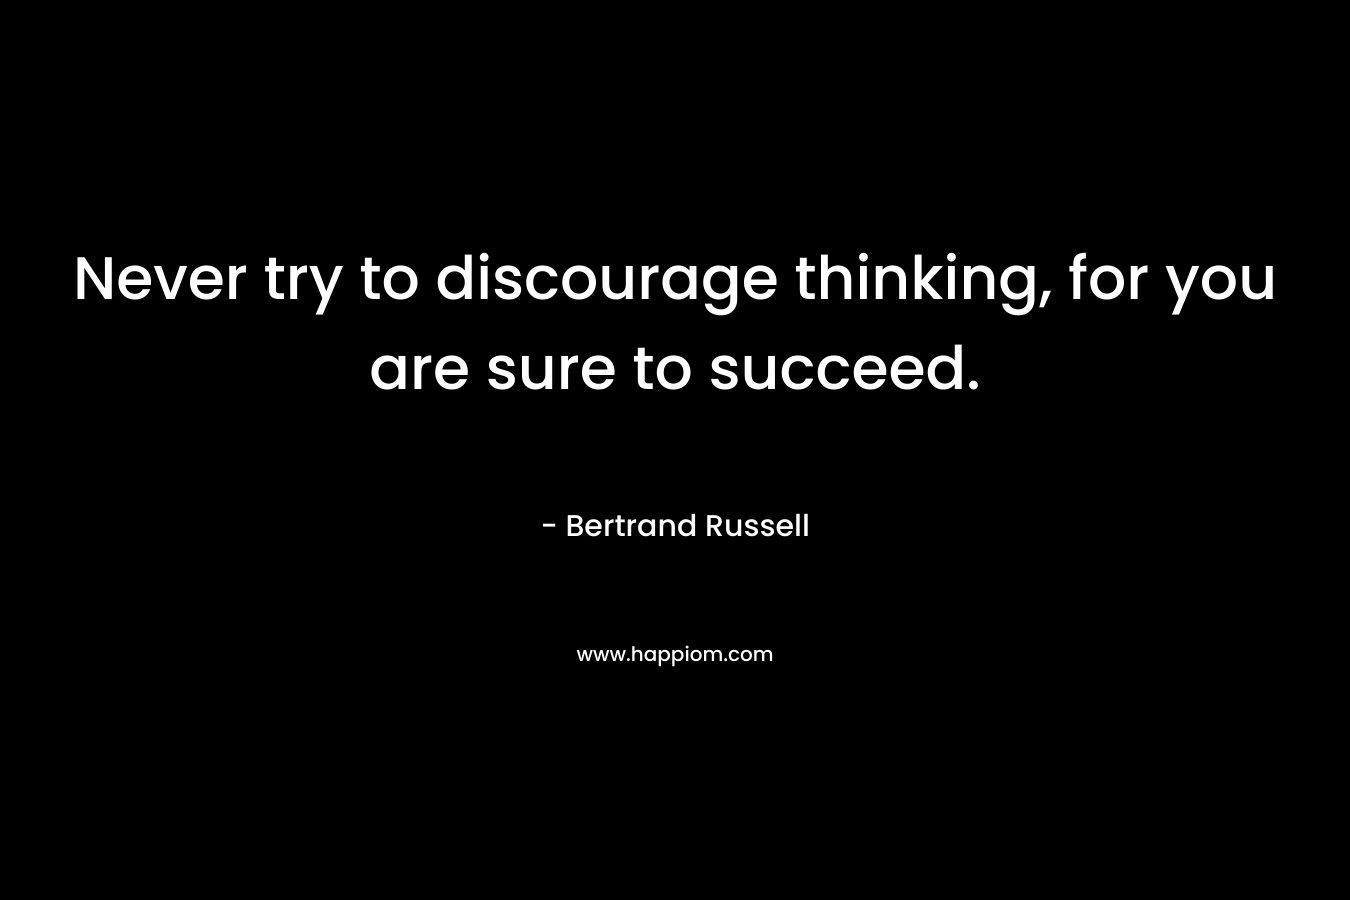 Never try to discourage thinking, for you are sure to succeed.